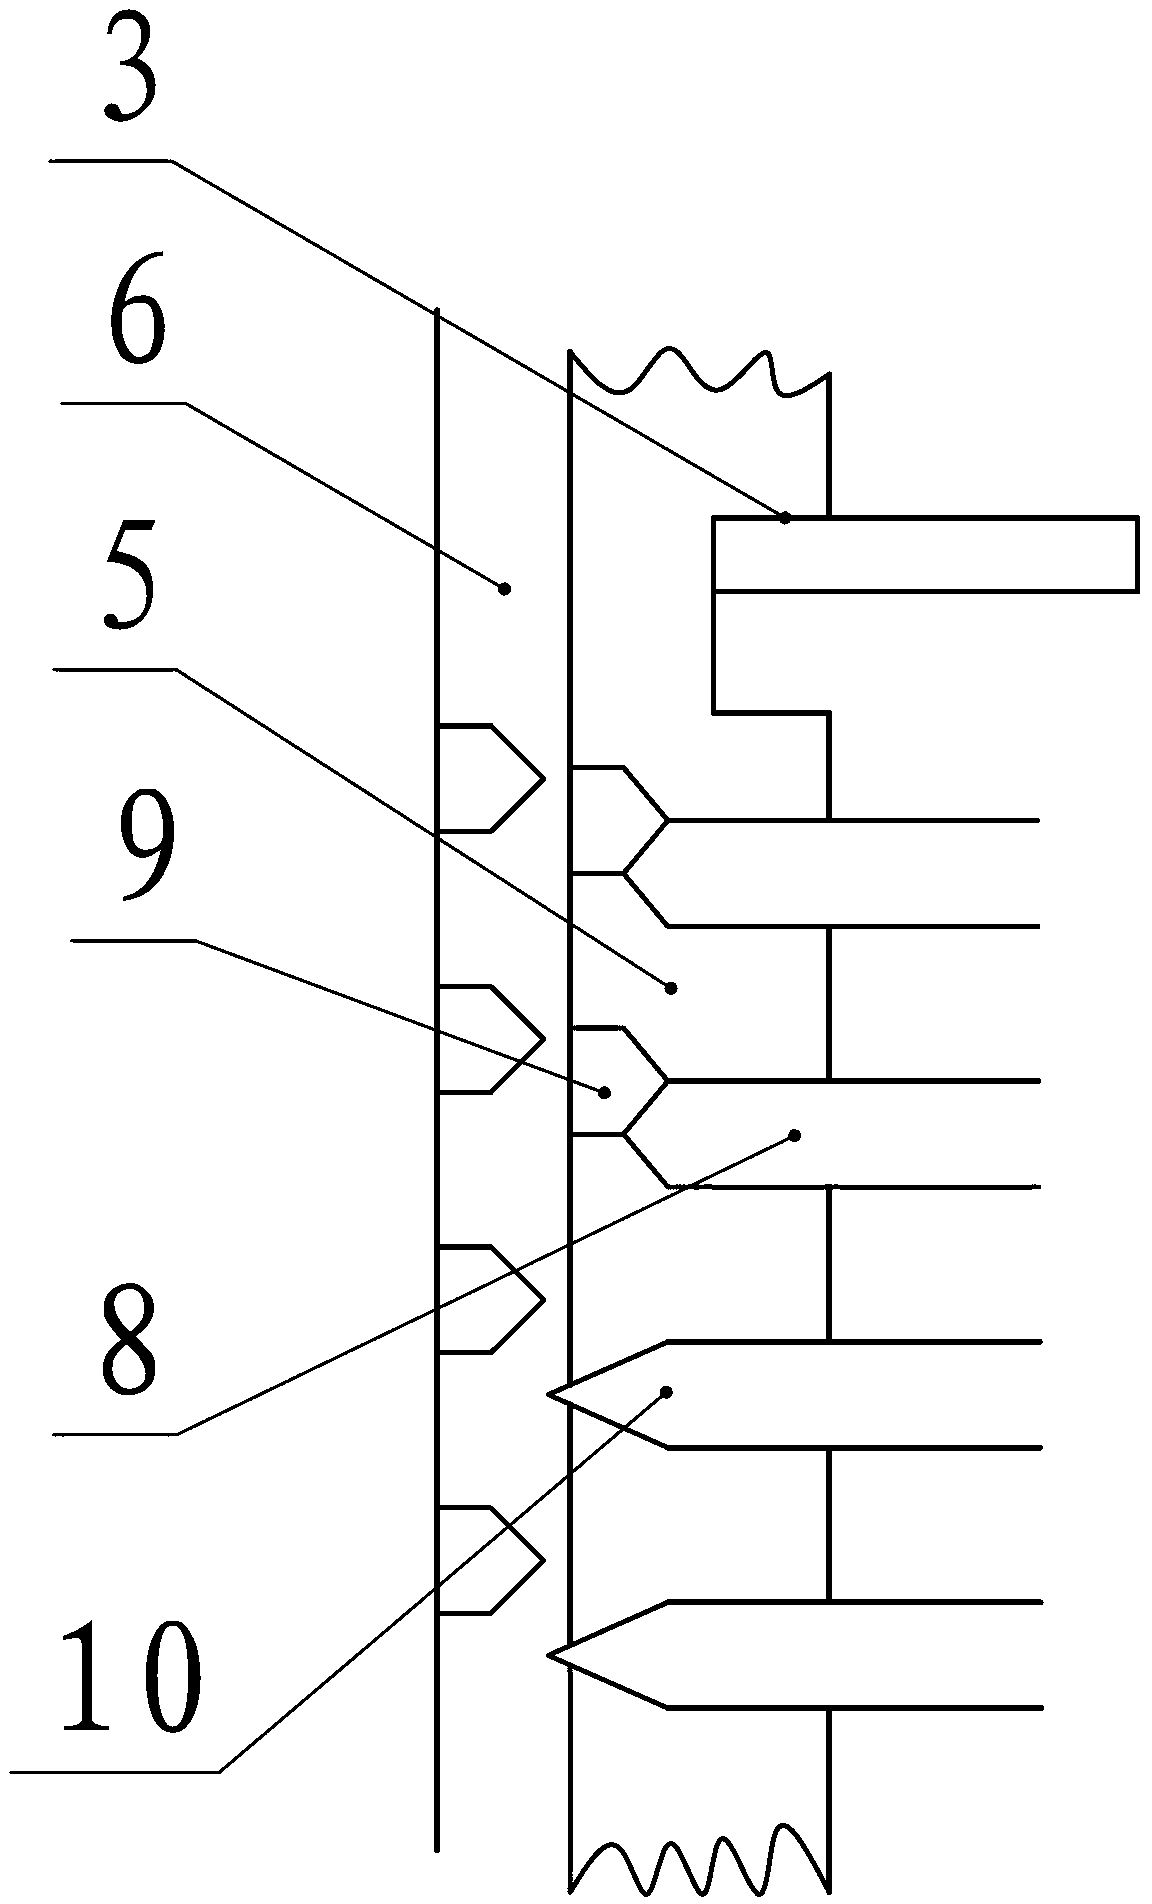 Synchronizer structure capable of preventing secondary impact during gear shift